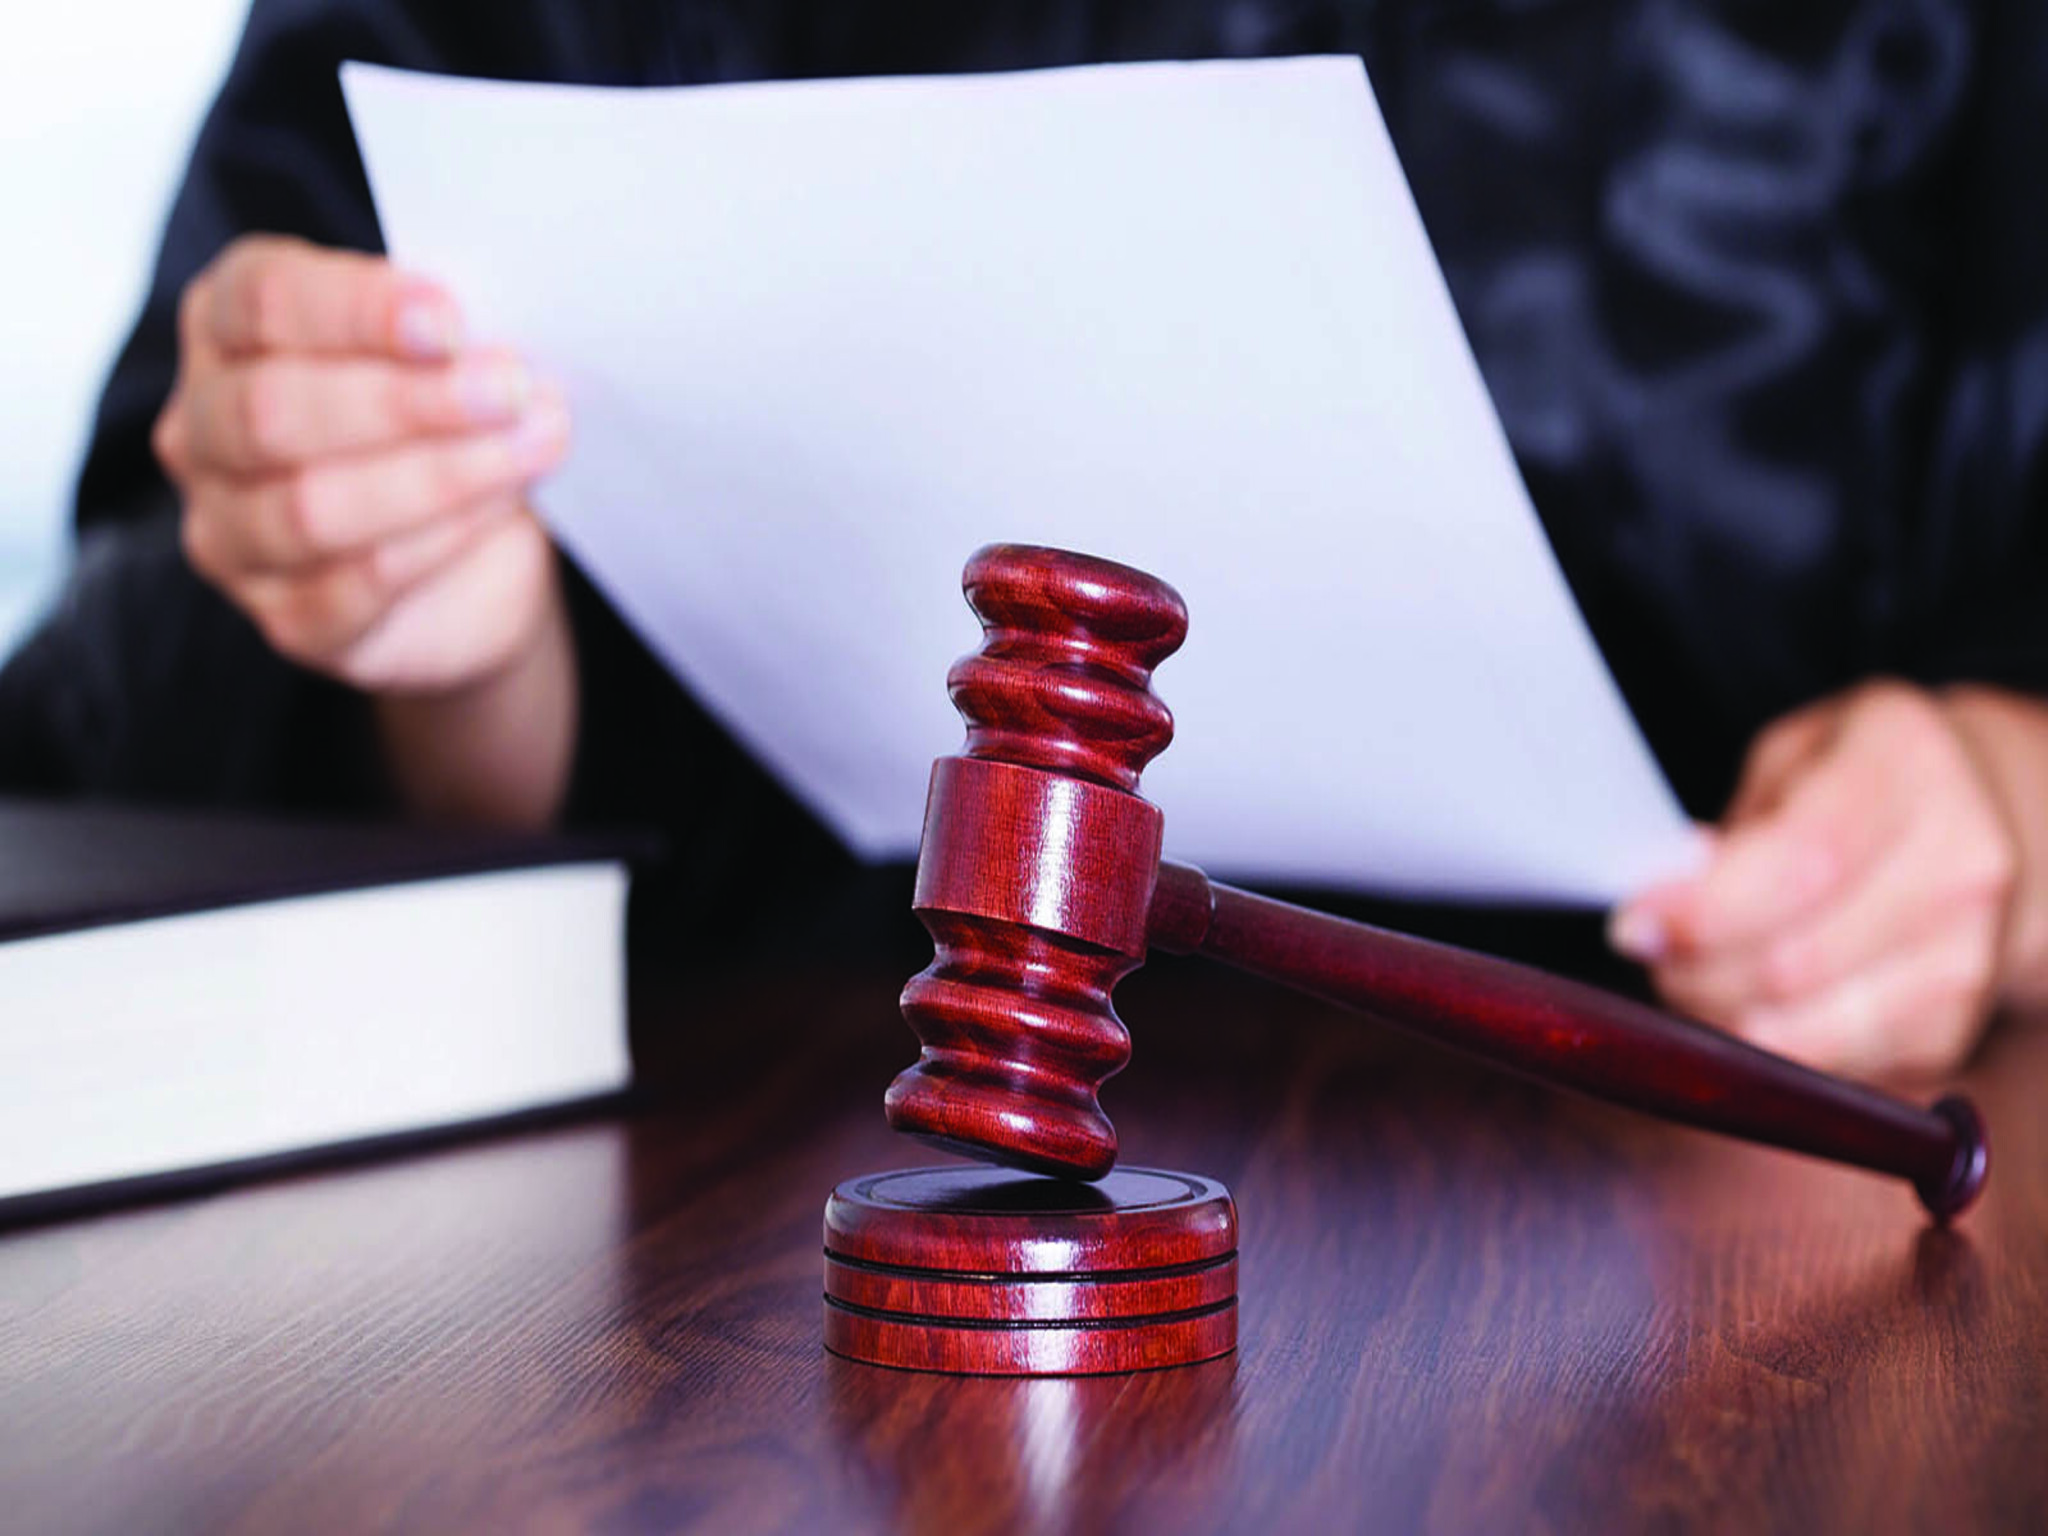 Dubai Court obligates a company to pay 200,000 dirhams to a resident charges of forgery